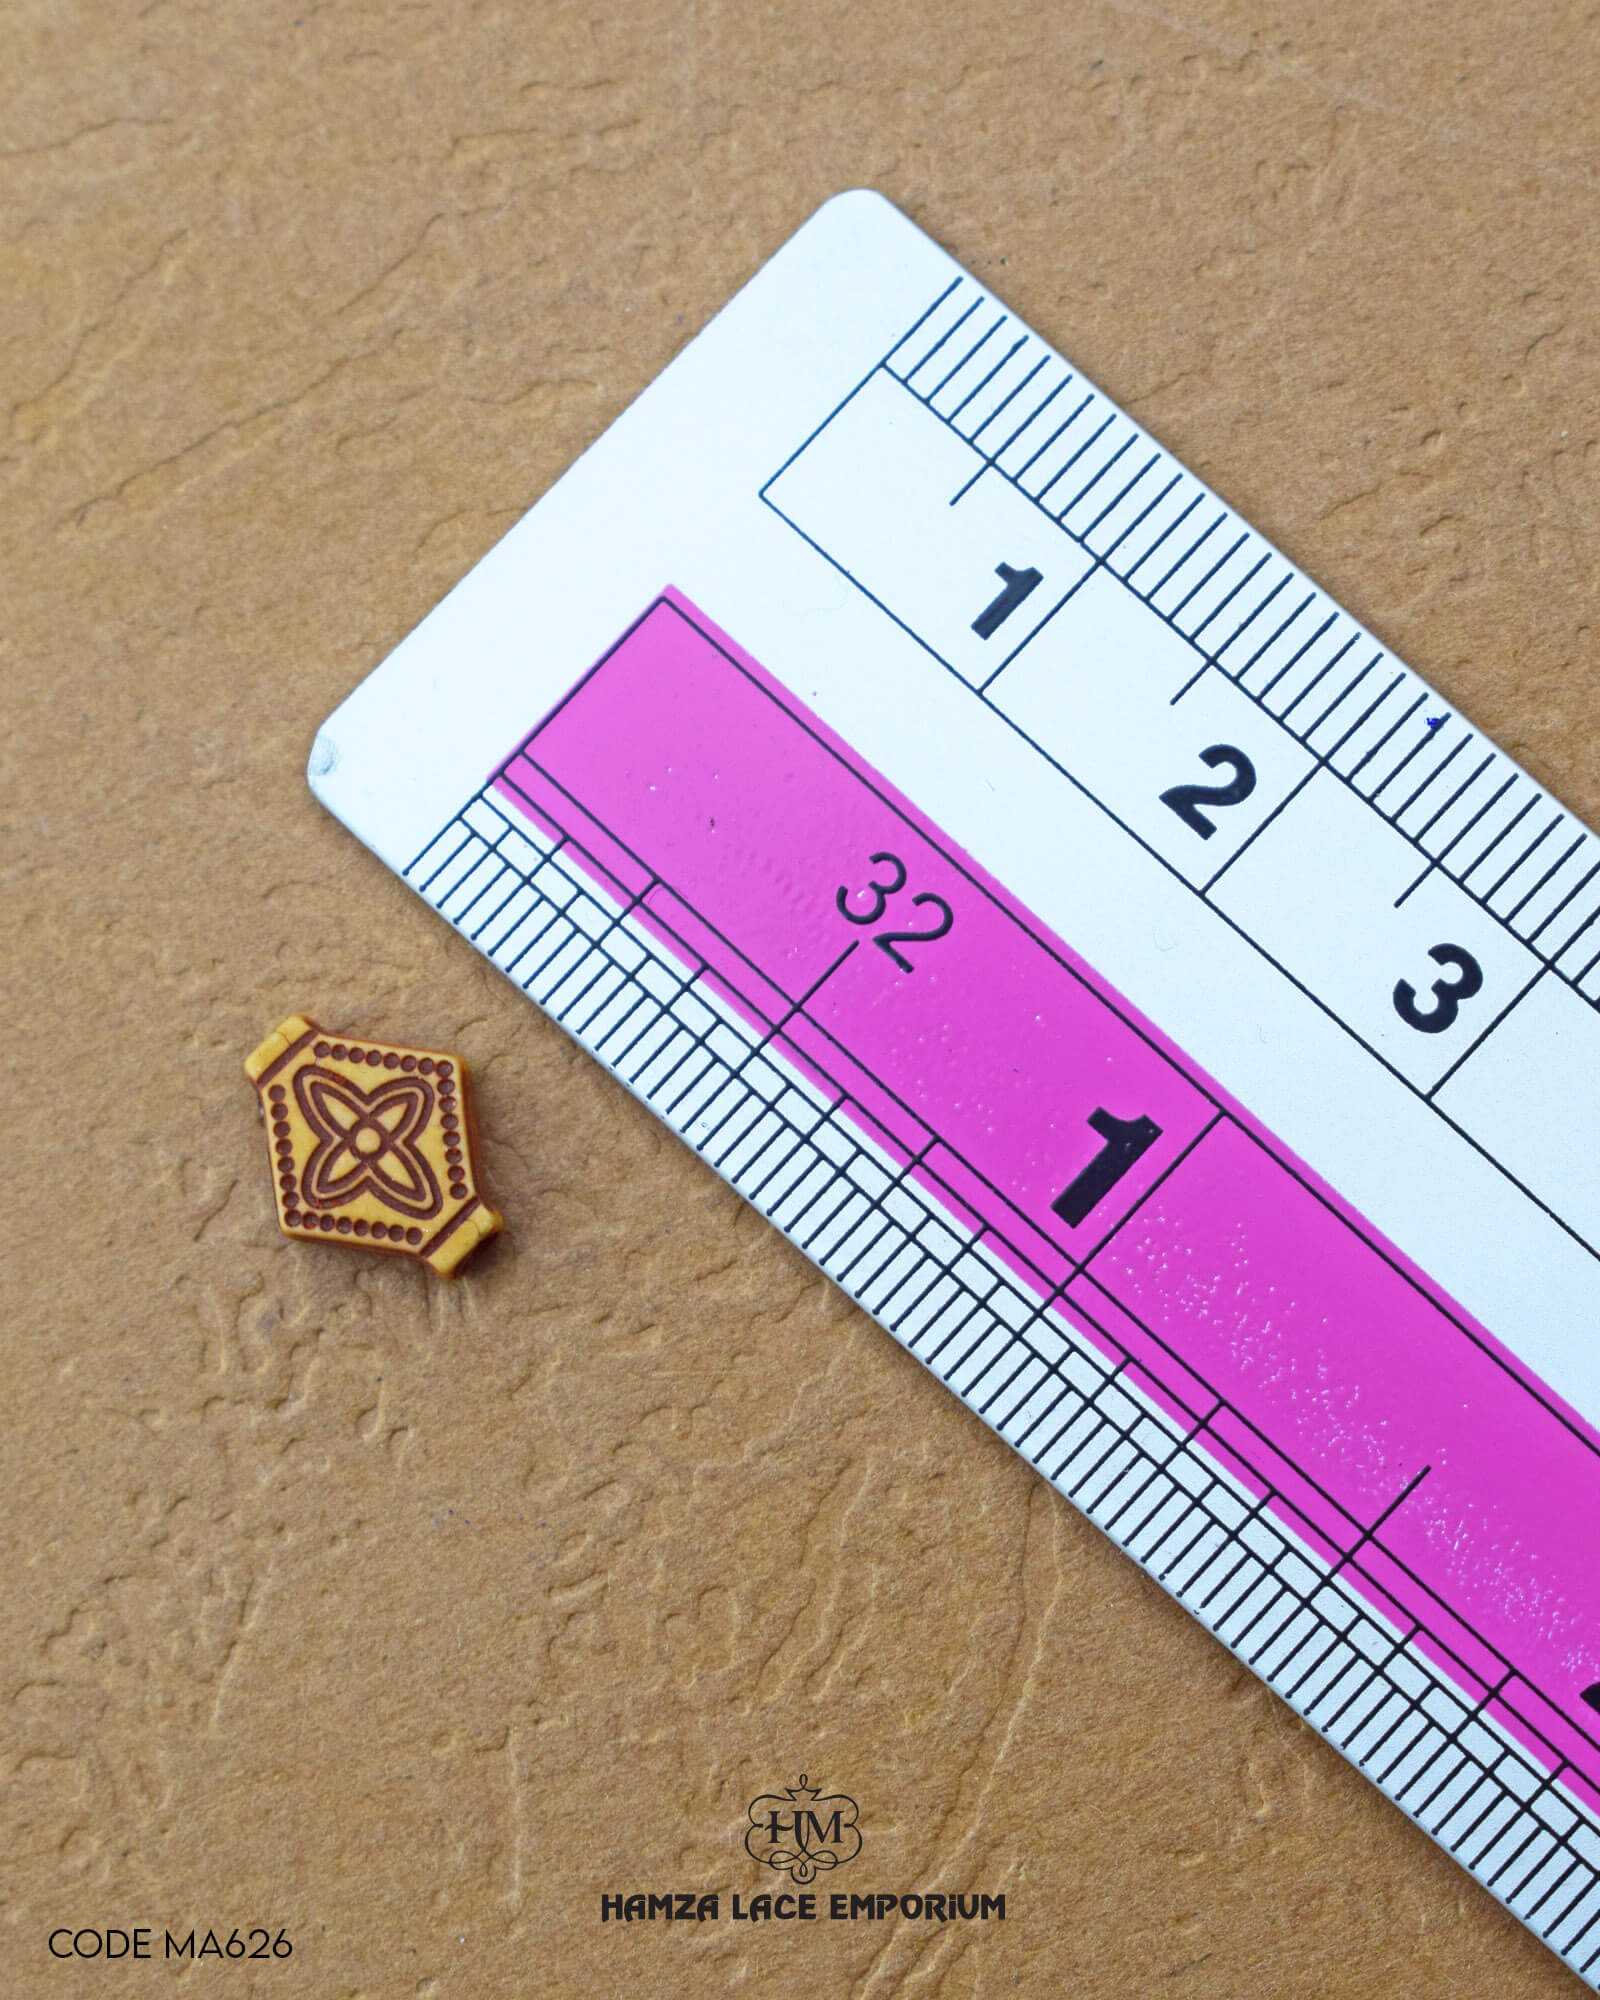 Size of the 'Kite Shape Wooden Button MA626' is shown with a ruler